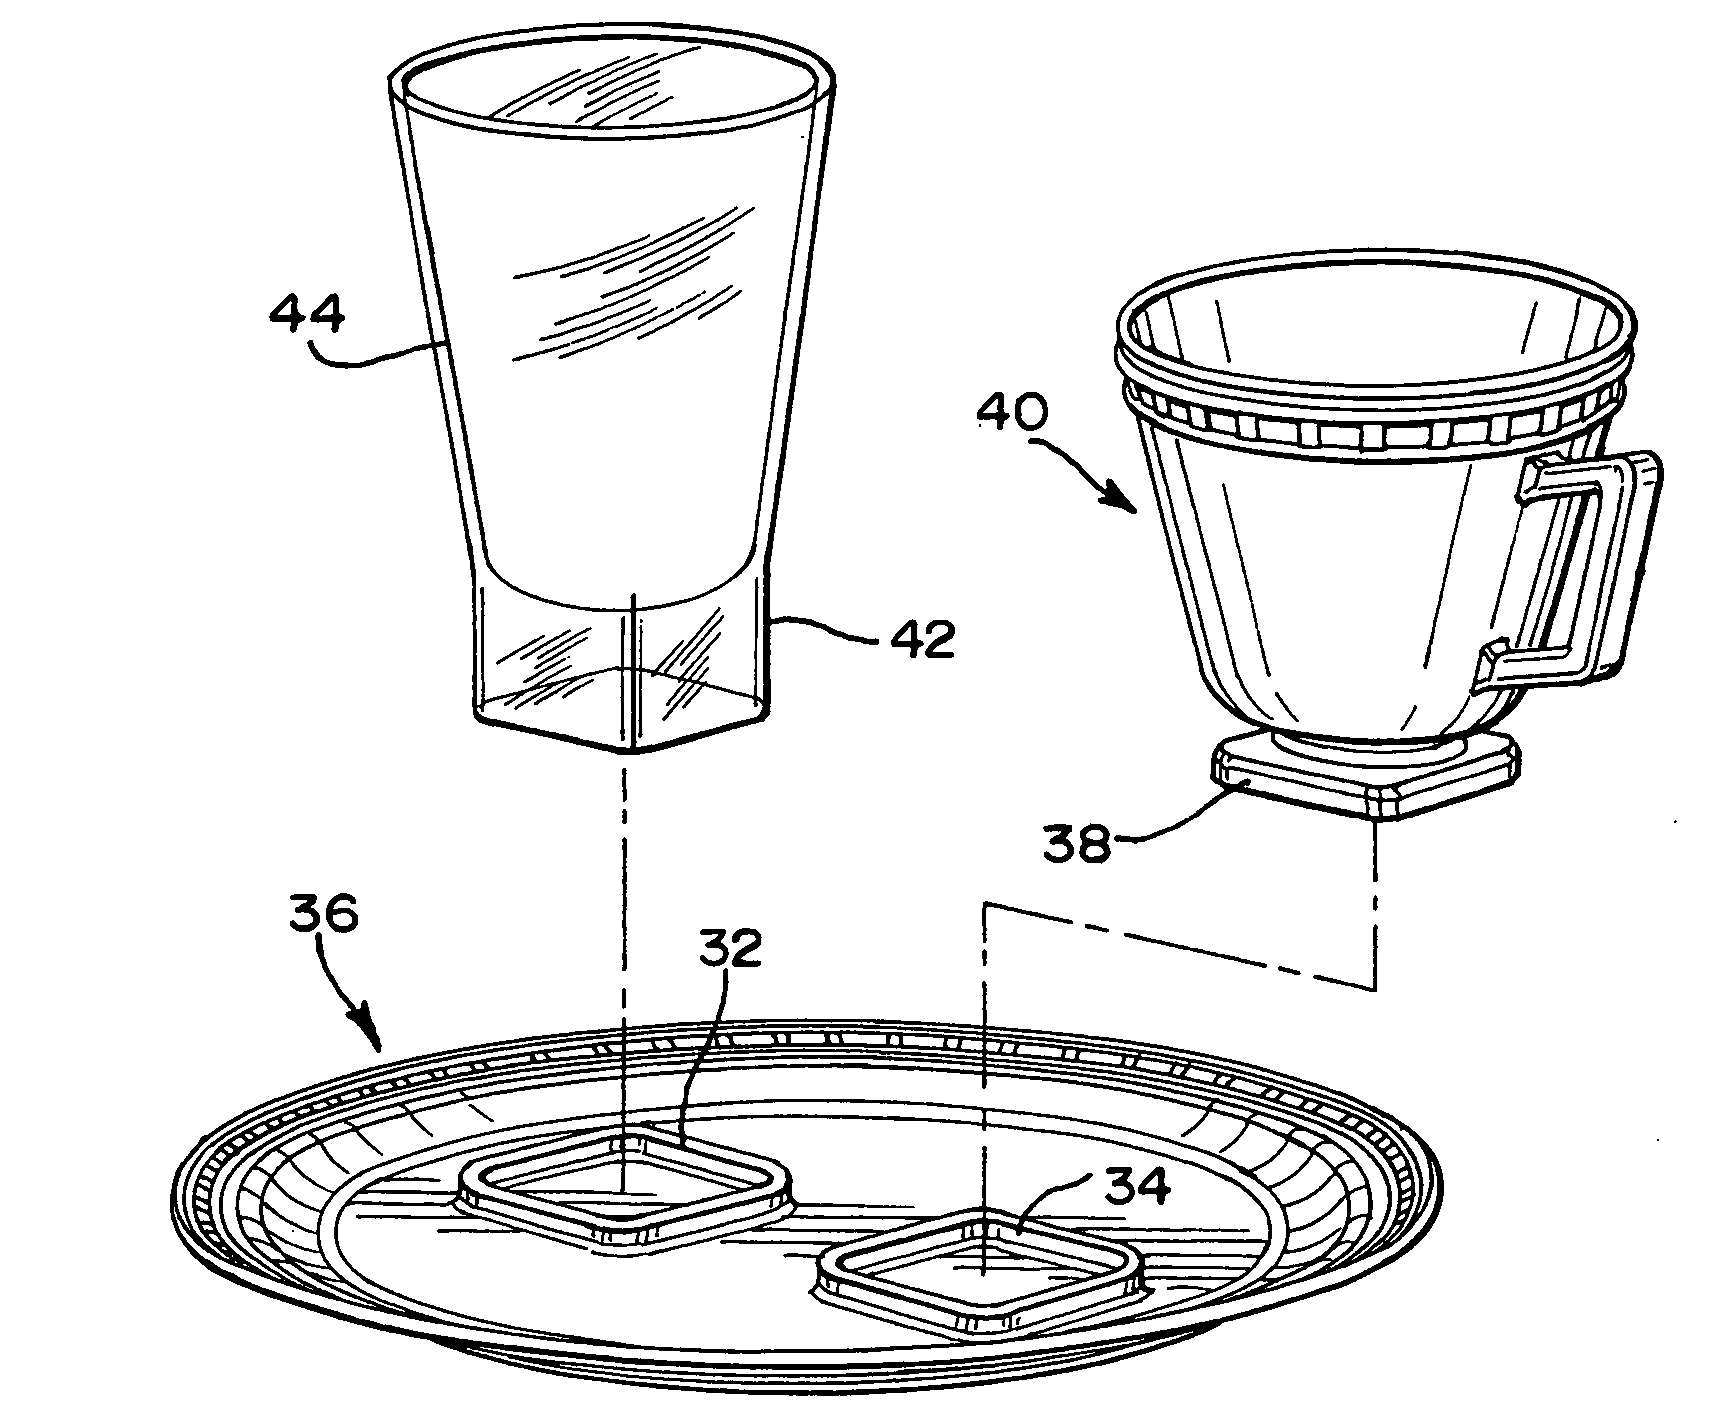 Combination food plate with cavity, for securing cup and glass with complementary bases, within cavity